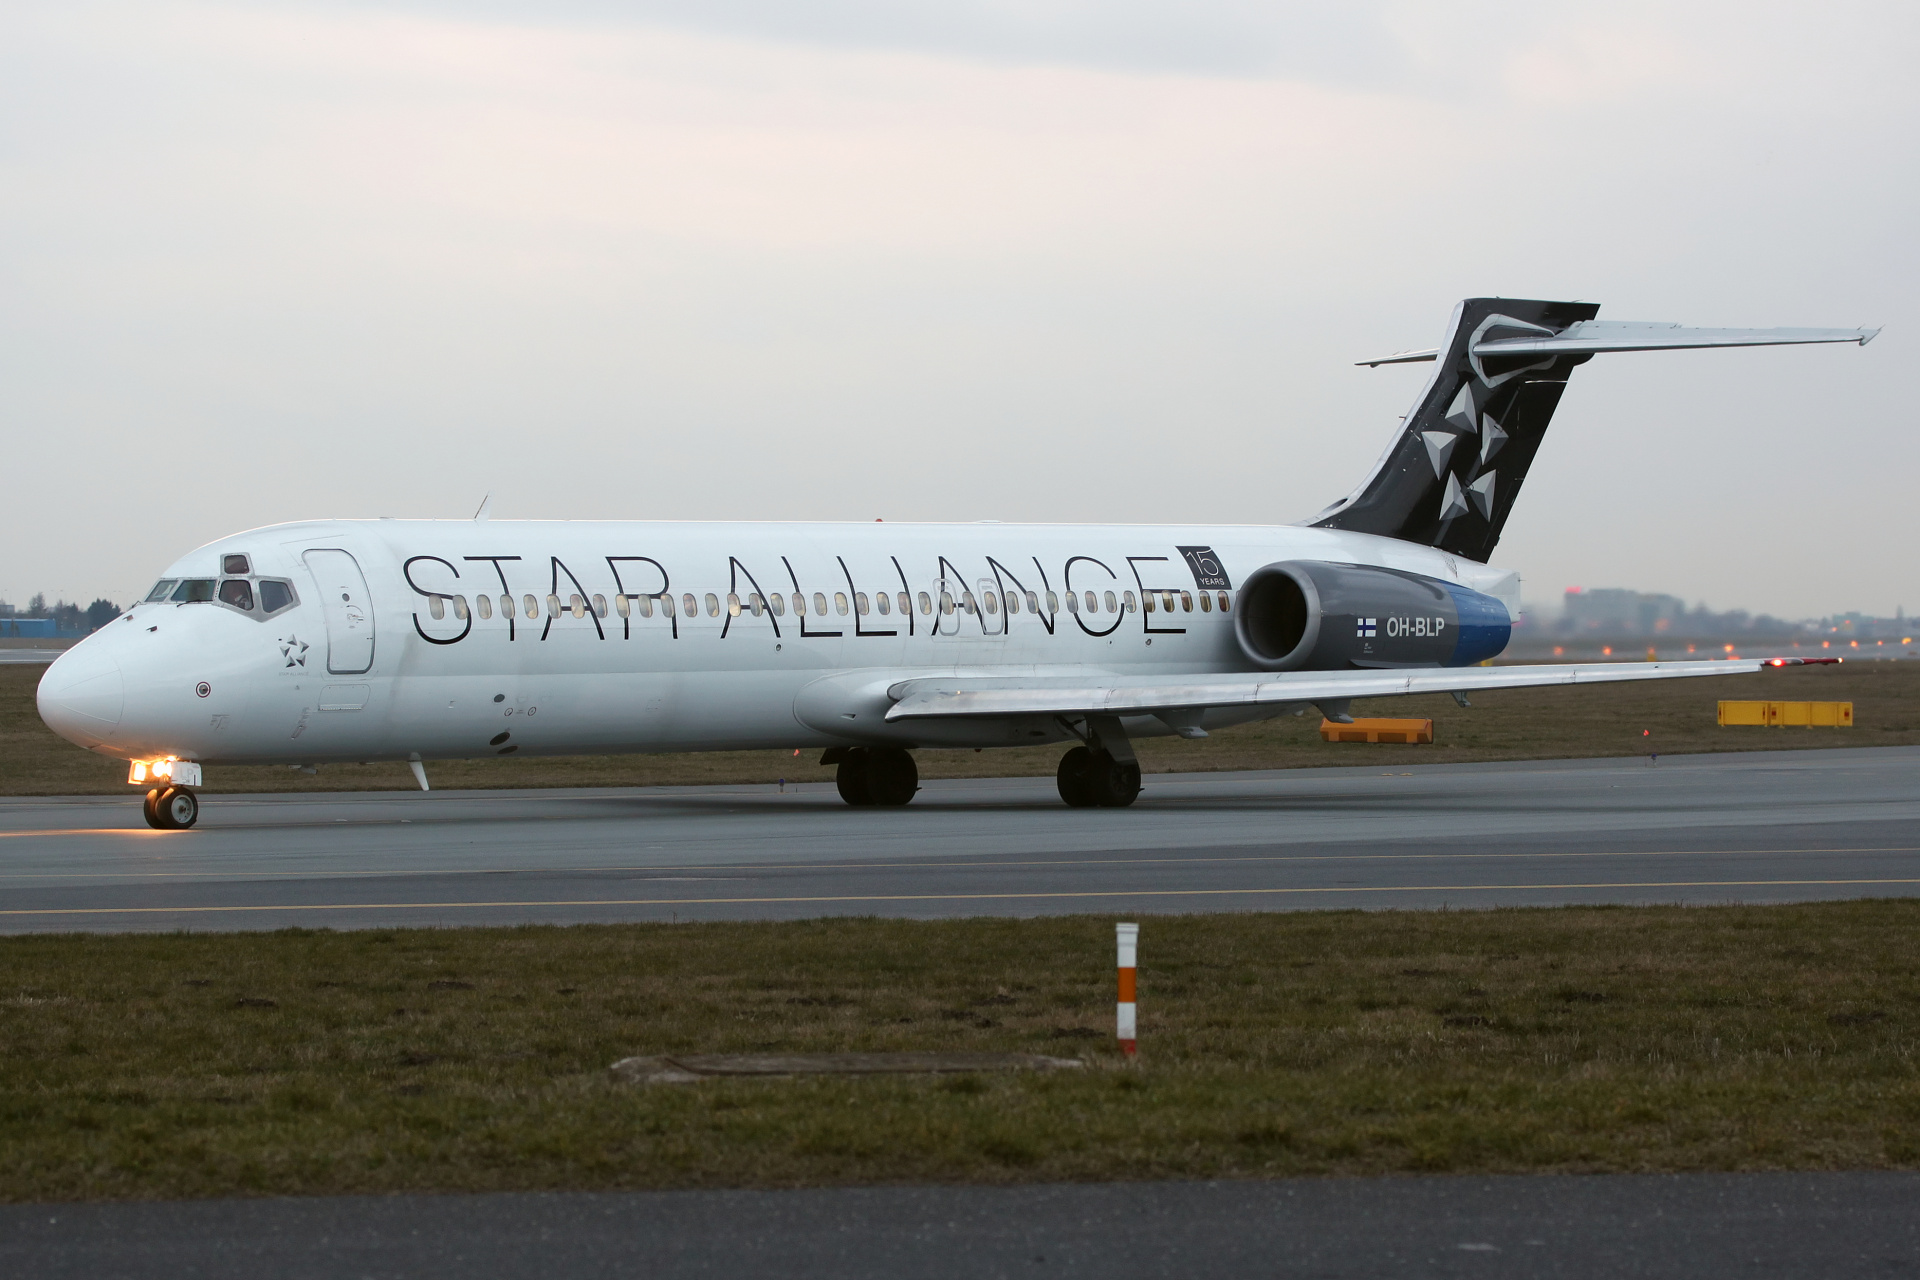 OH-BLP, Blue1 (Star Alliance livery) (Aircraft » EPWA Spotting » Boeing 717)